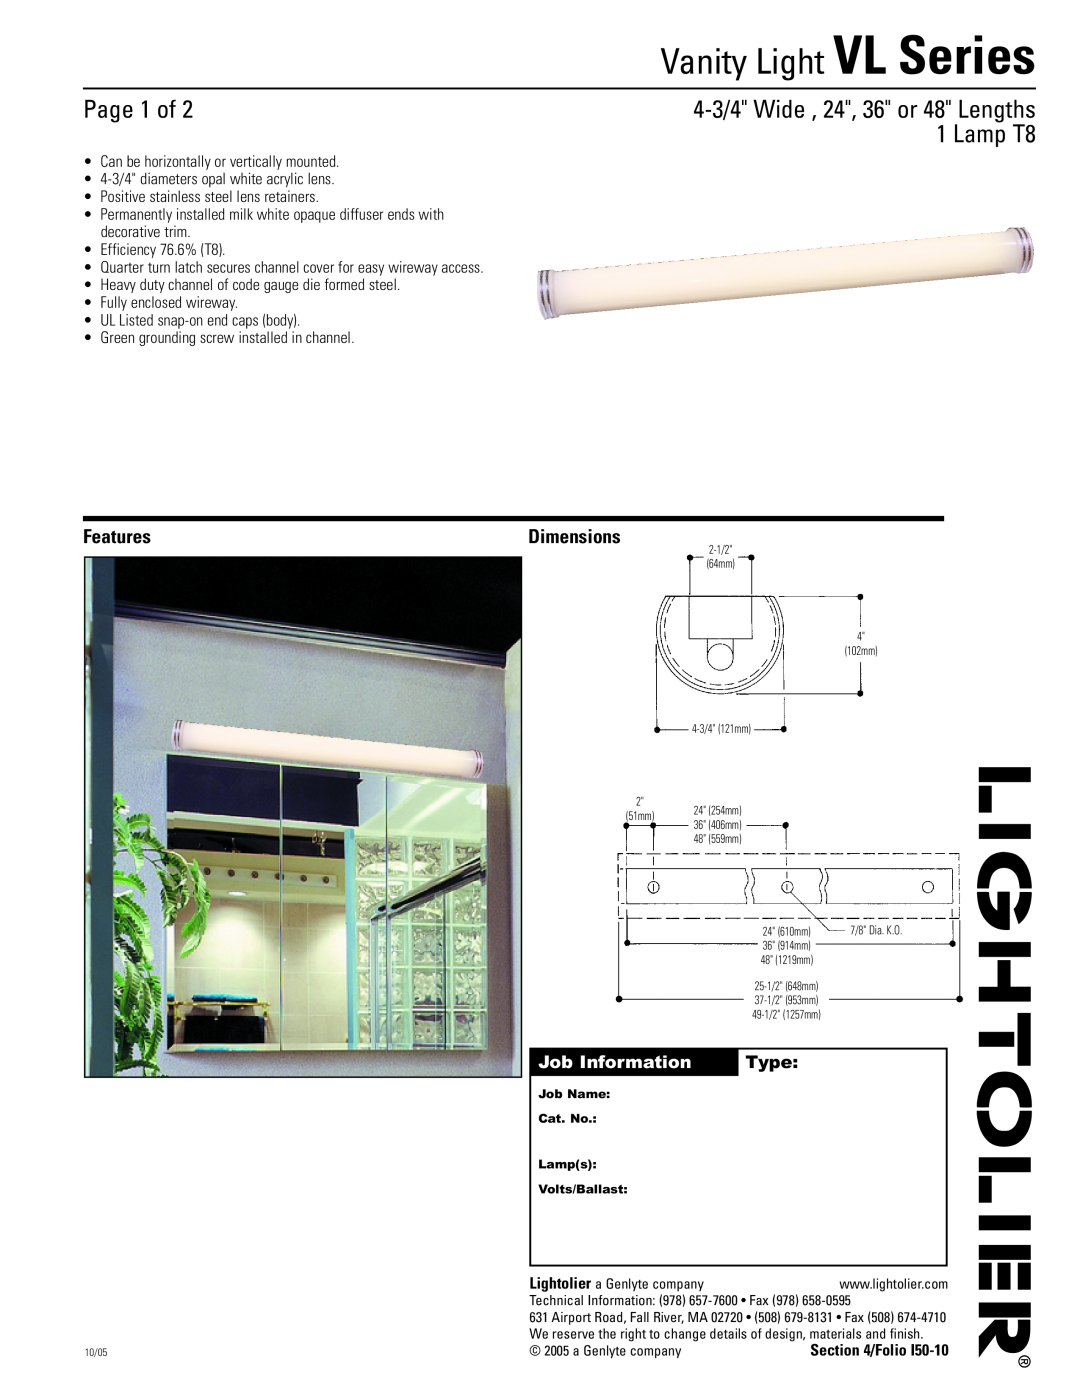 Lightolier dimensions Page 1 of, Lamp T8, Features, Job Information, Type, Dimensions, Vanity Light VL Series 